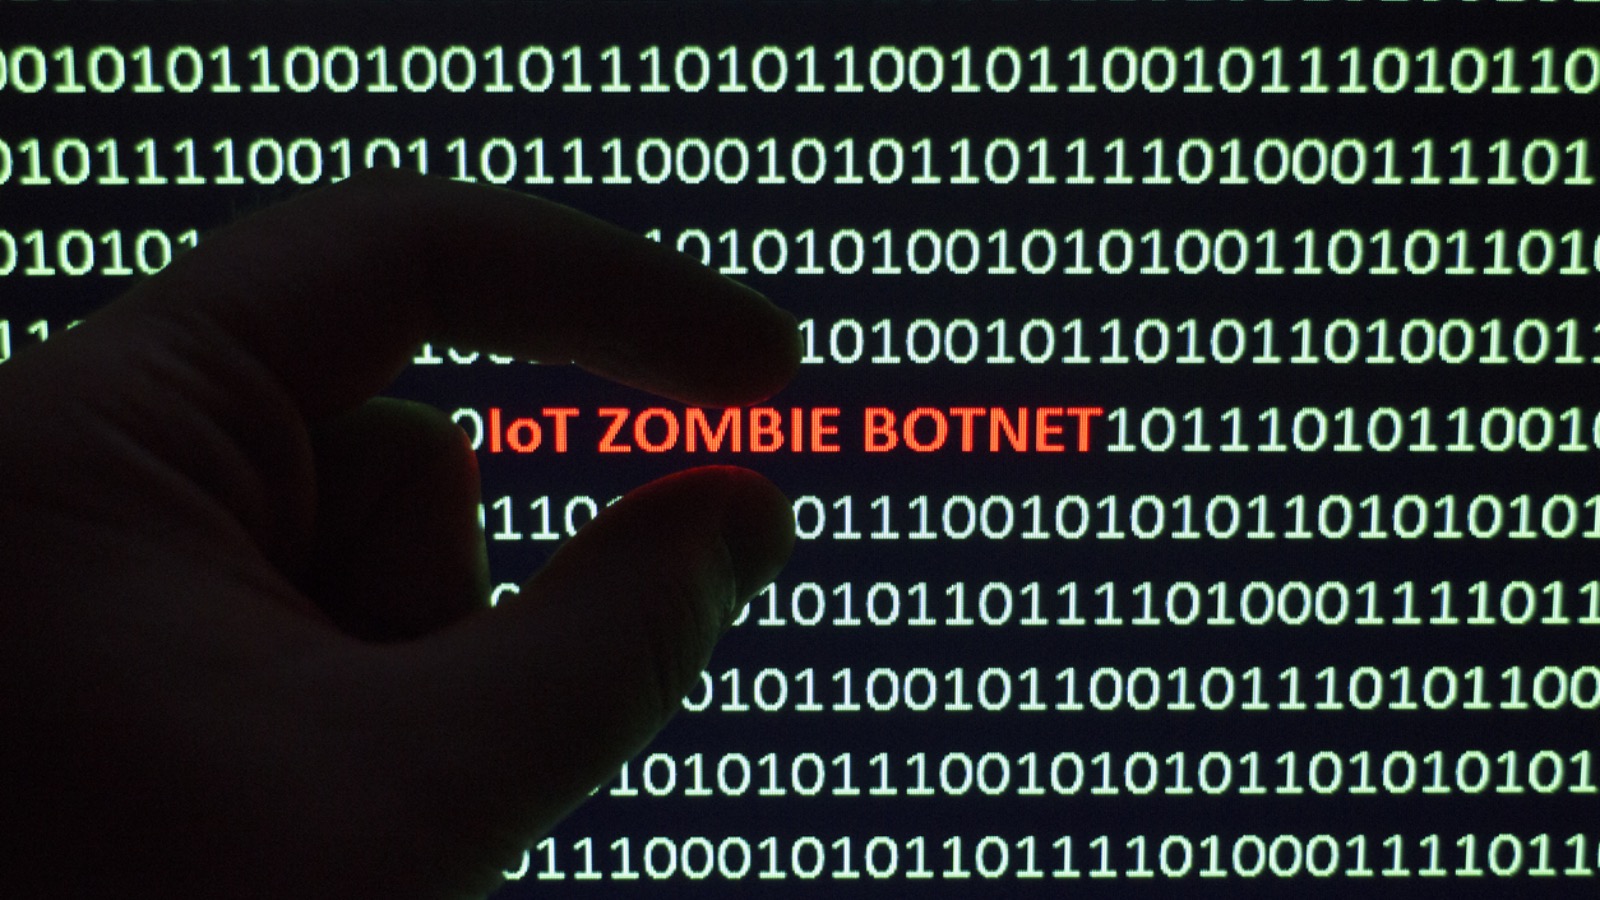 A Massive Botnet Using Compromised Routers Is Ready To Attack